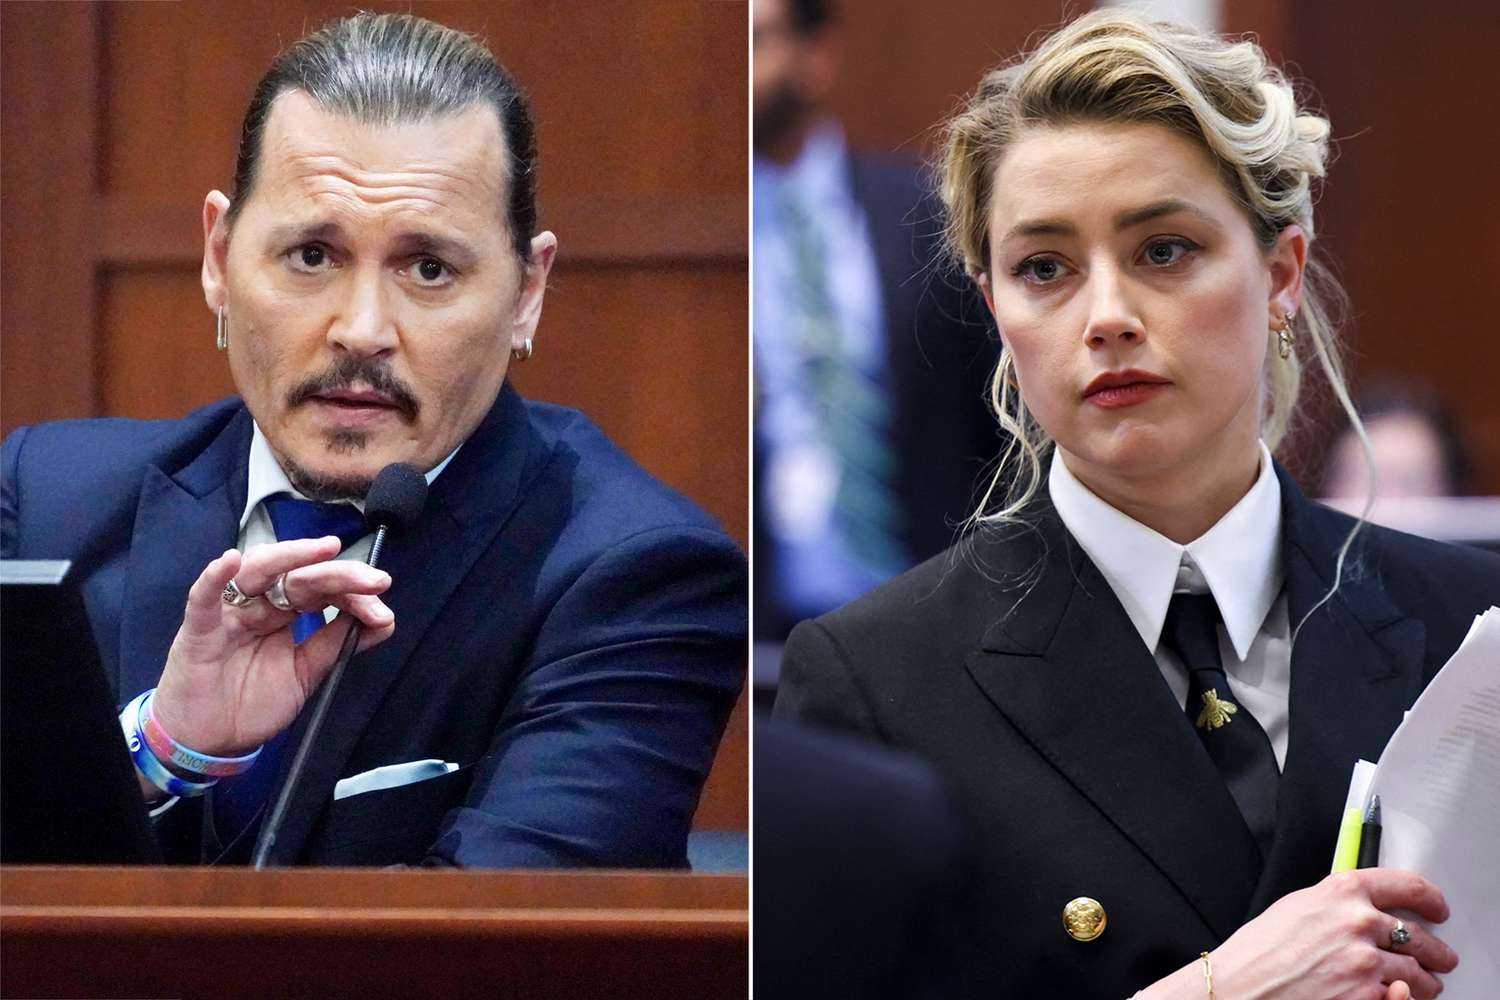 Johnny Depp and Amber Heard (Source: People)